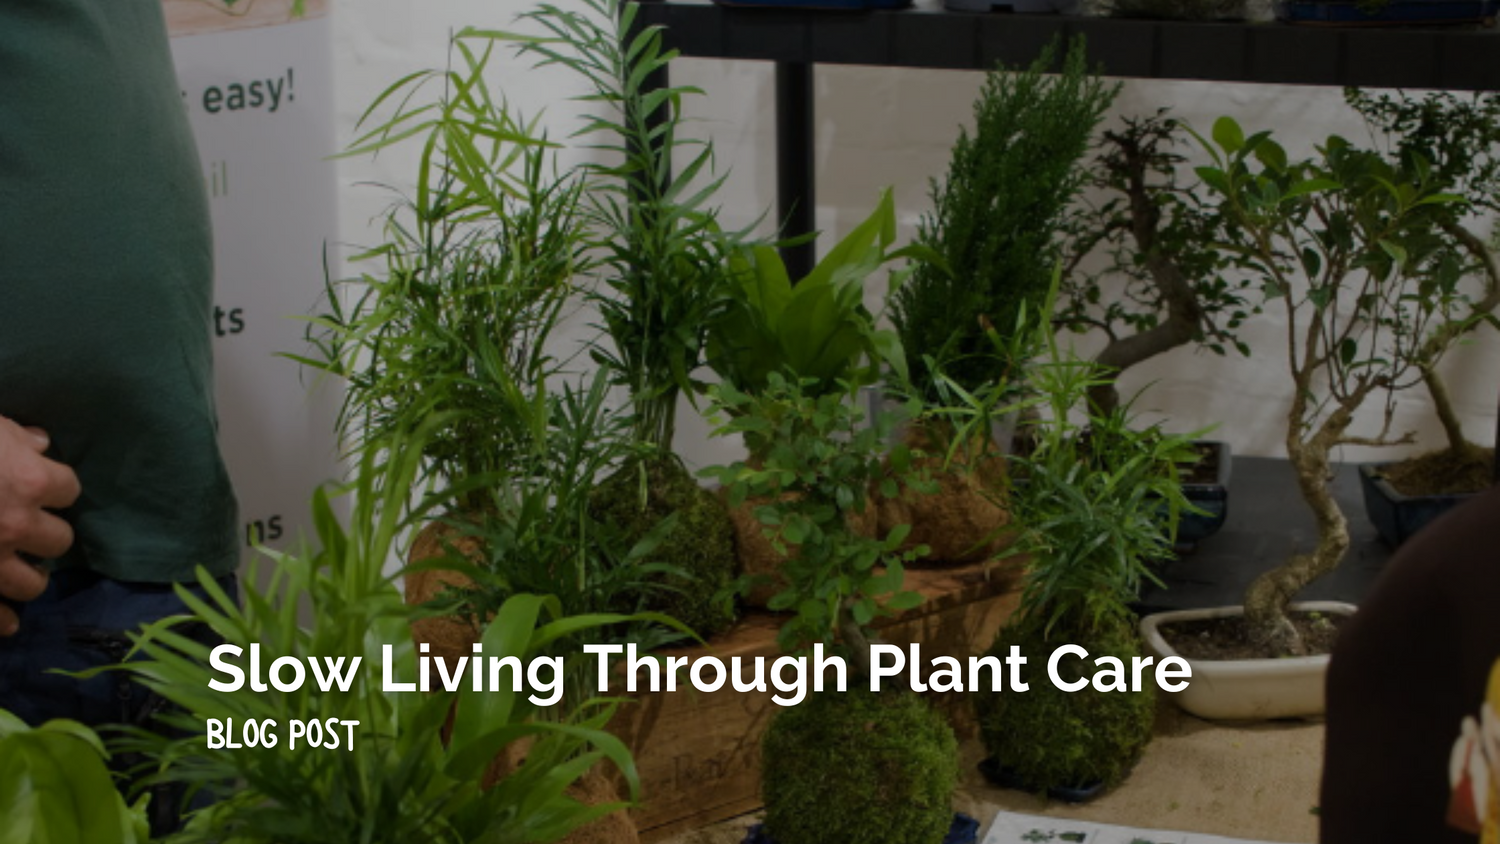 Cultivating a Slower, More Mindful Life Through Plant Care